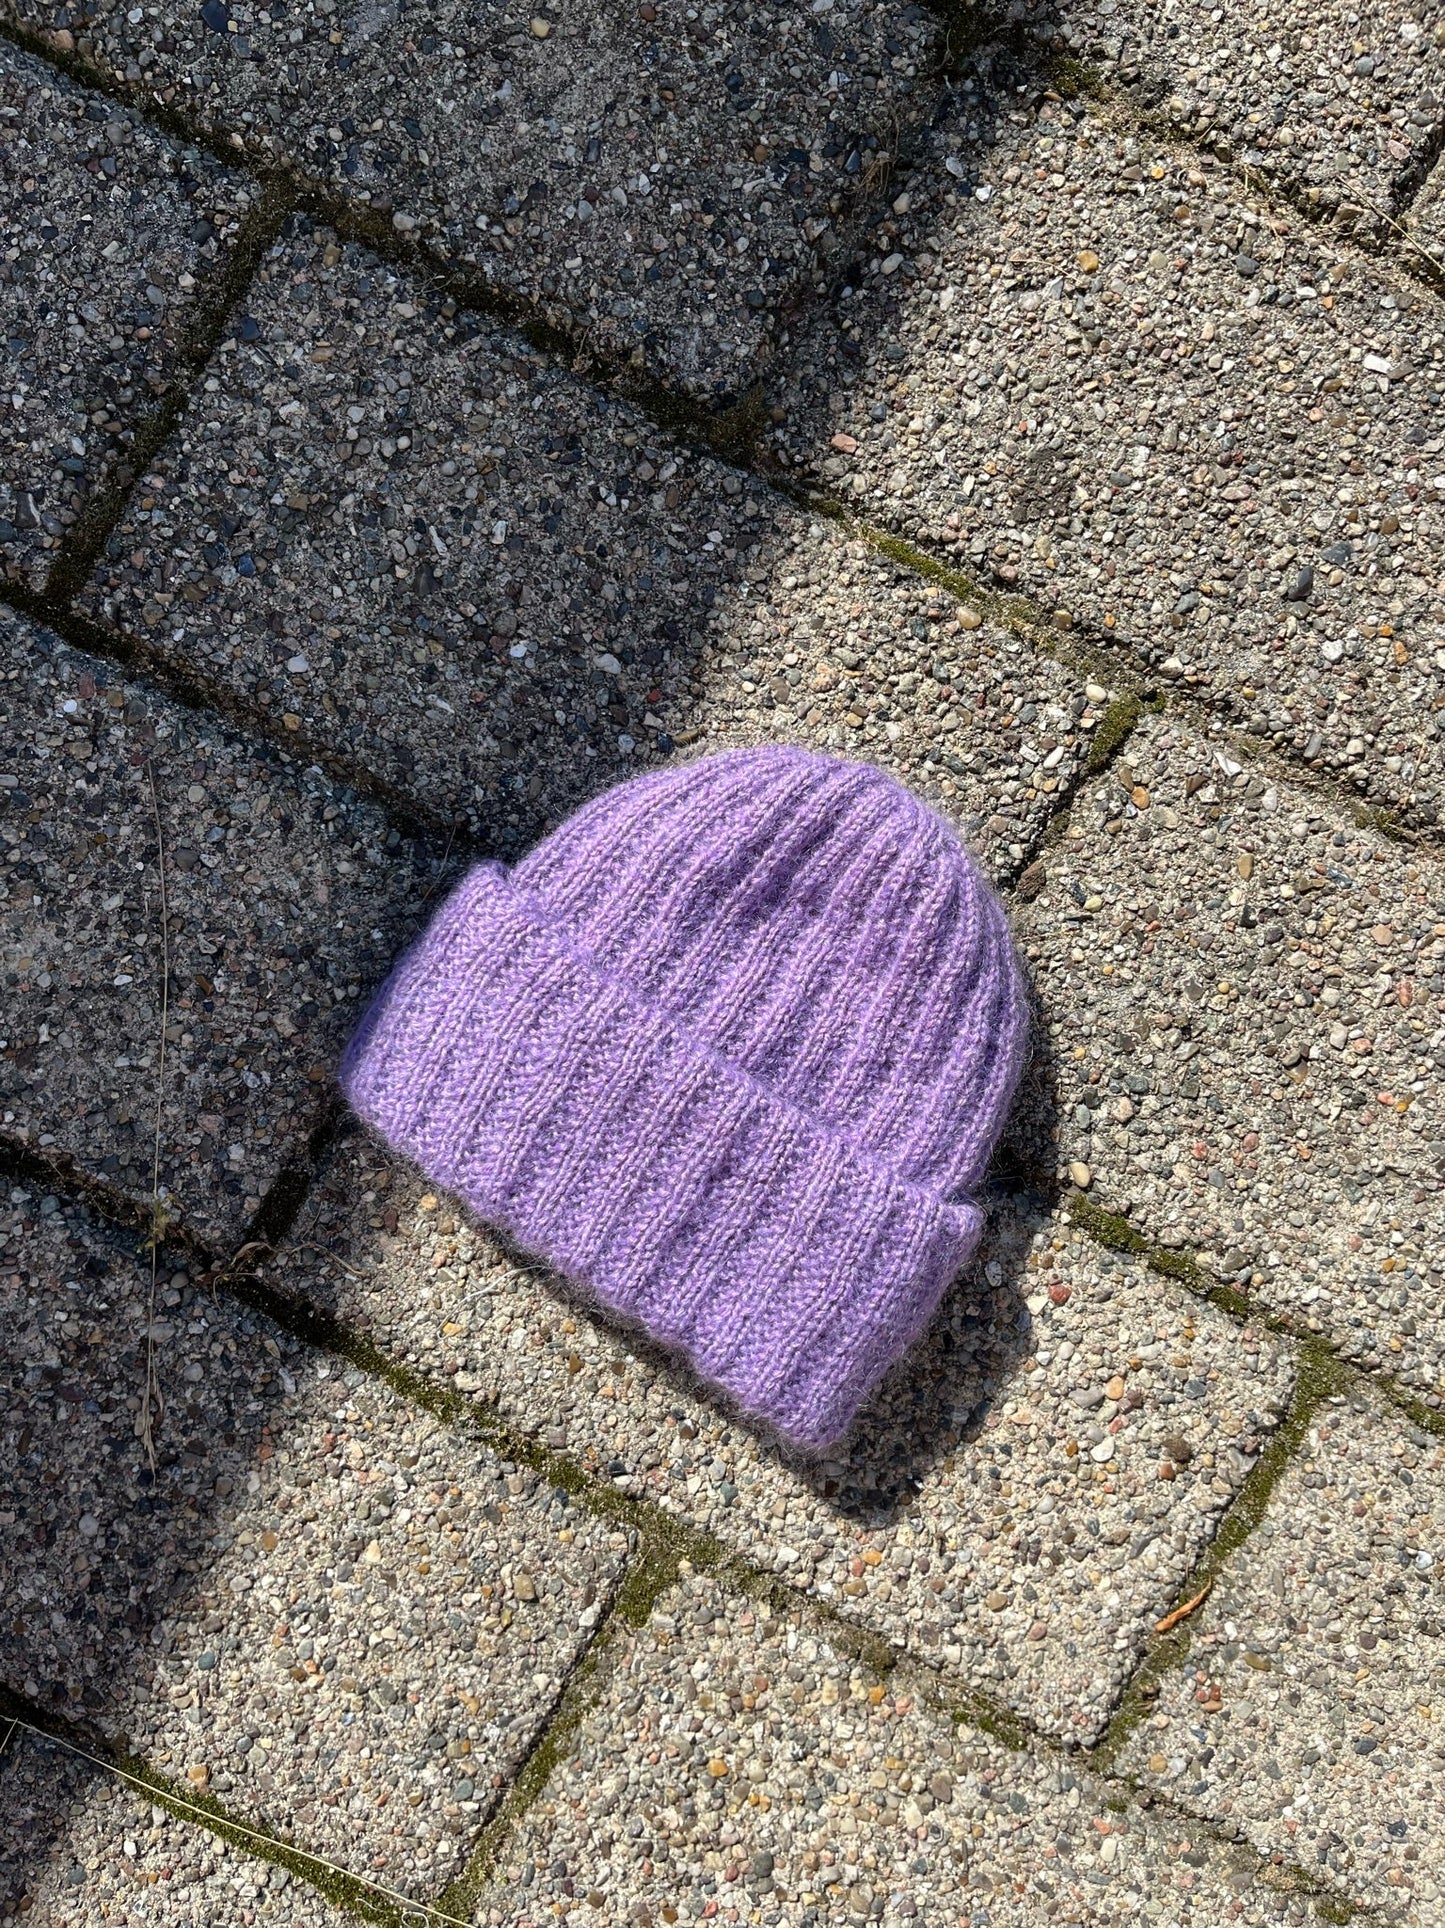 Easy Daily Beanie Norsk